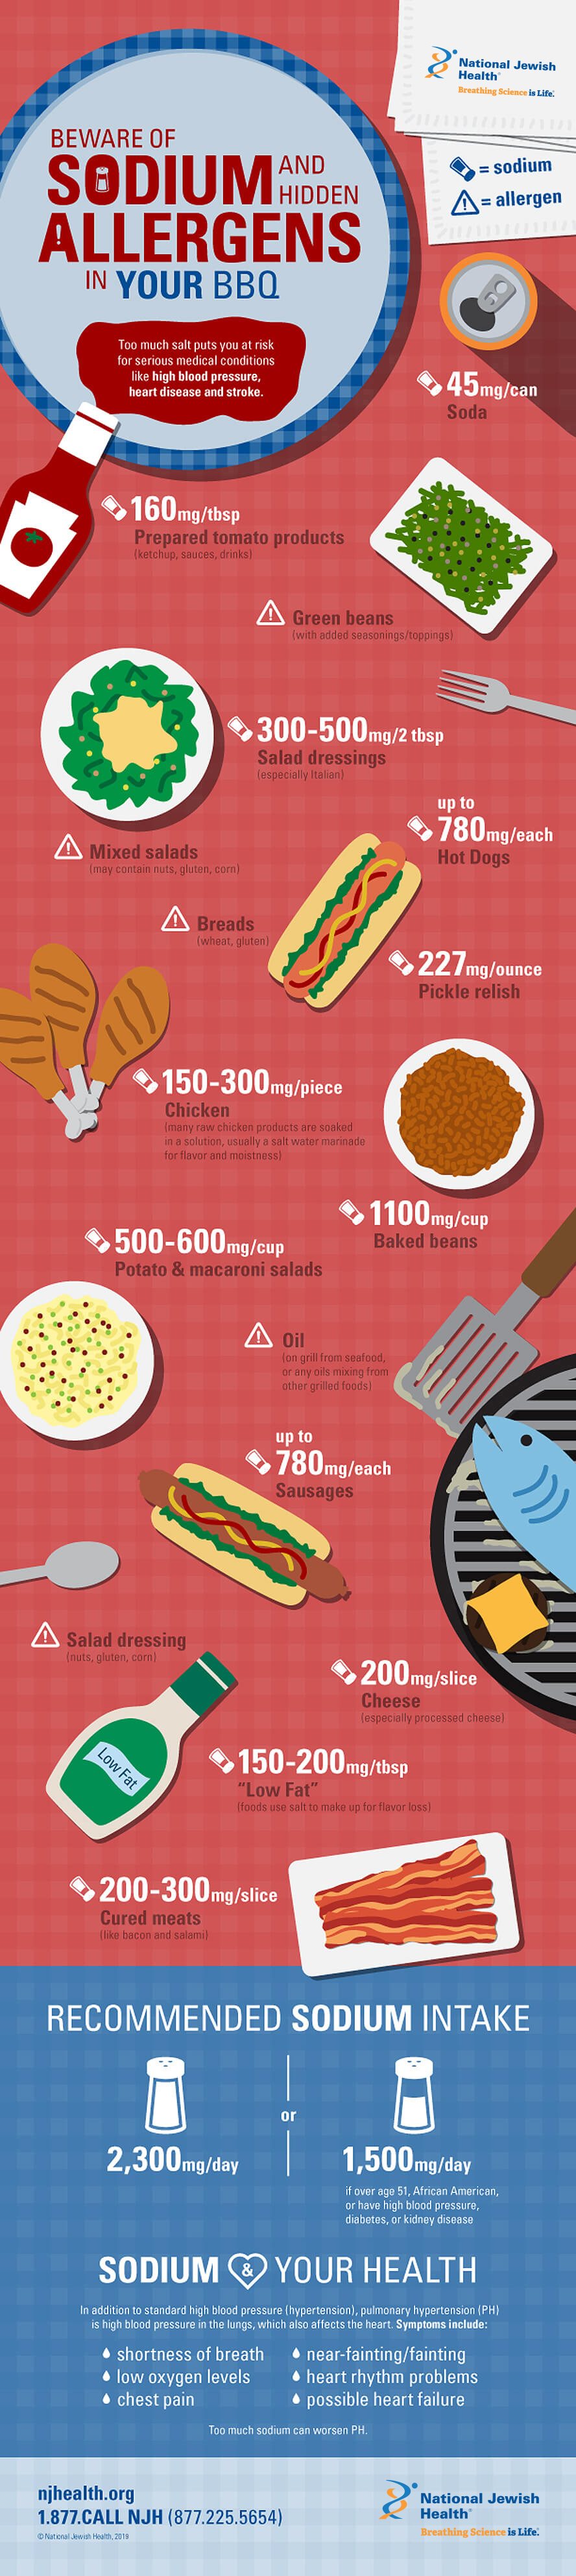 Sodium and allergens in BBQ - infographic